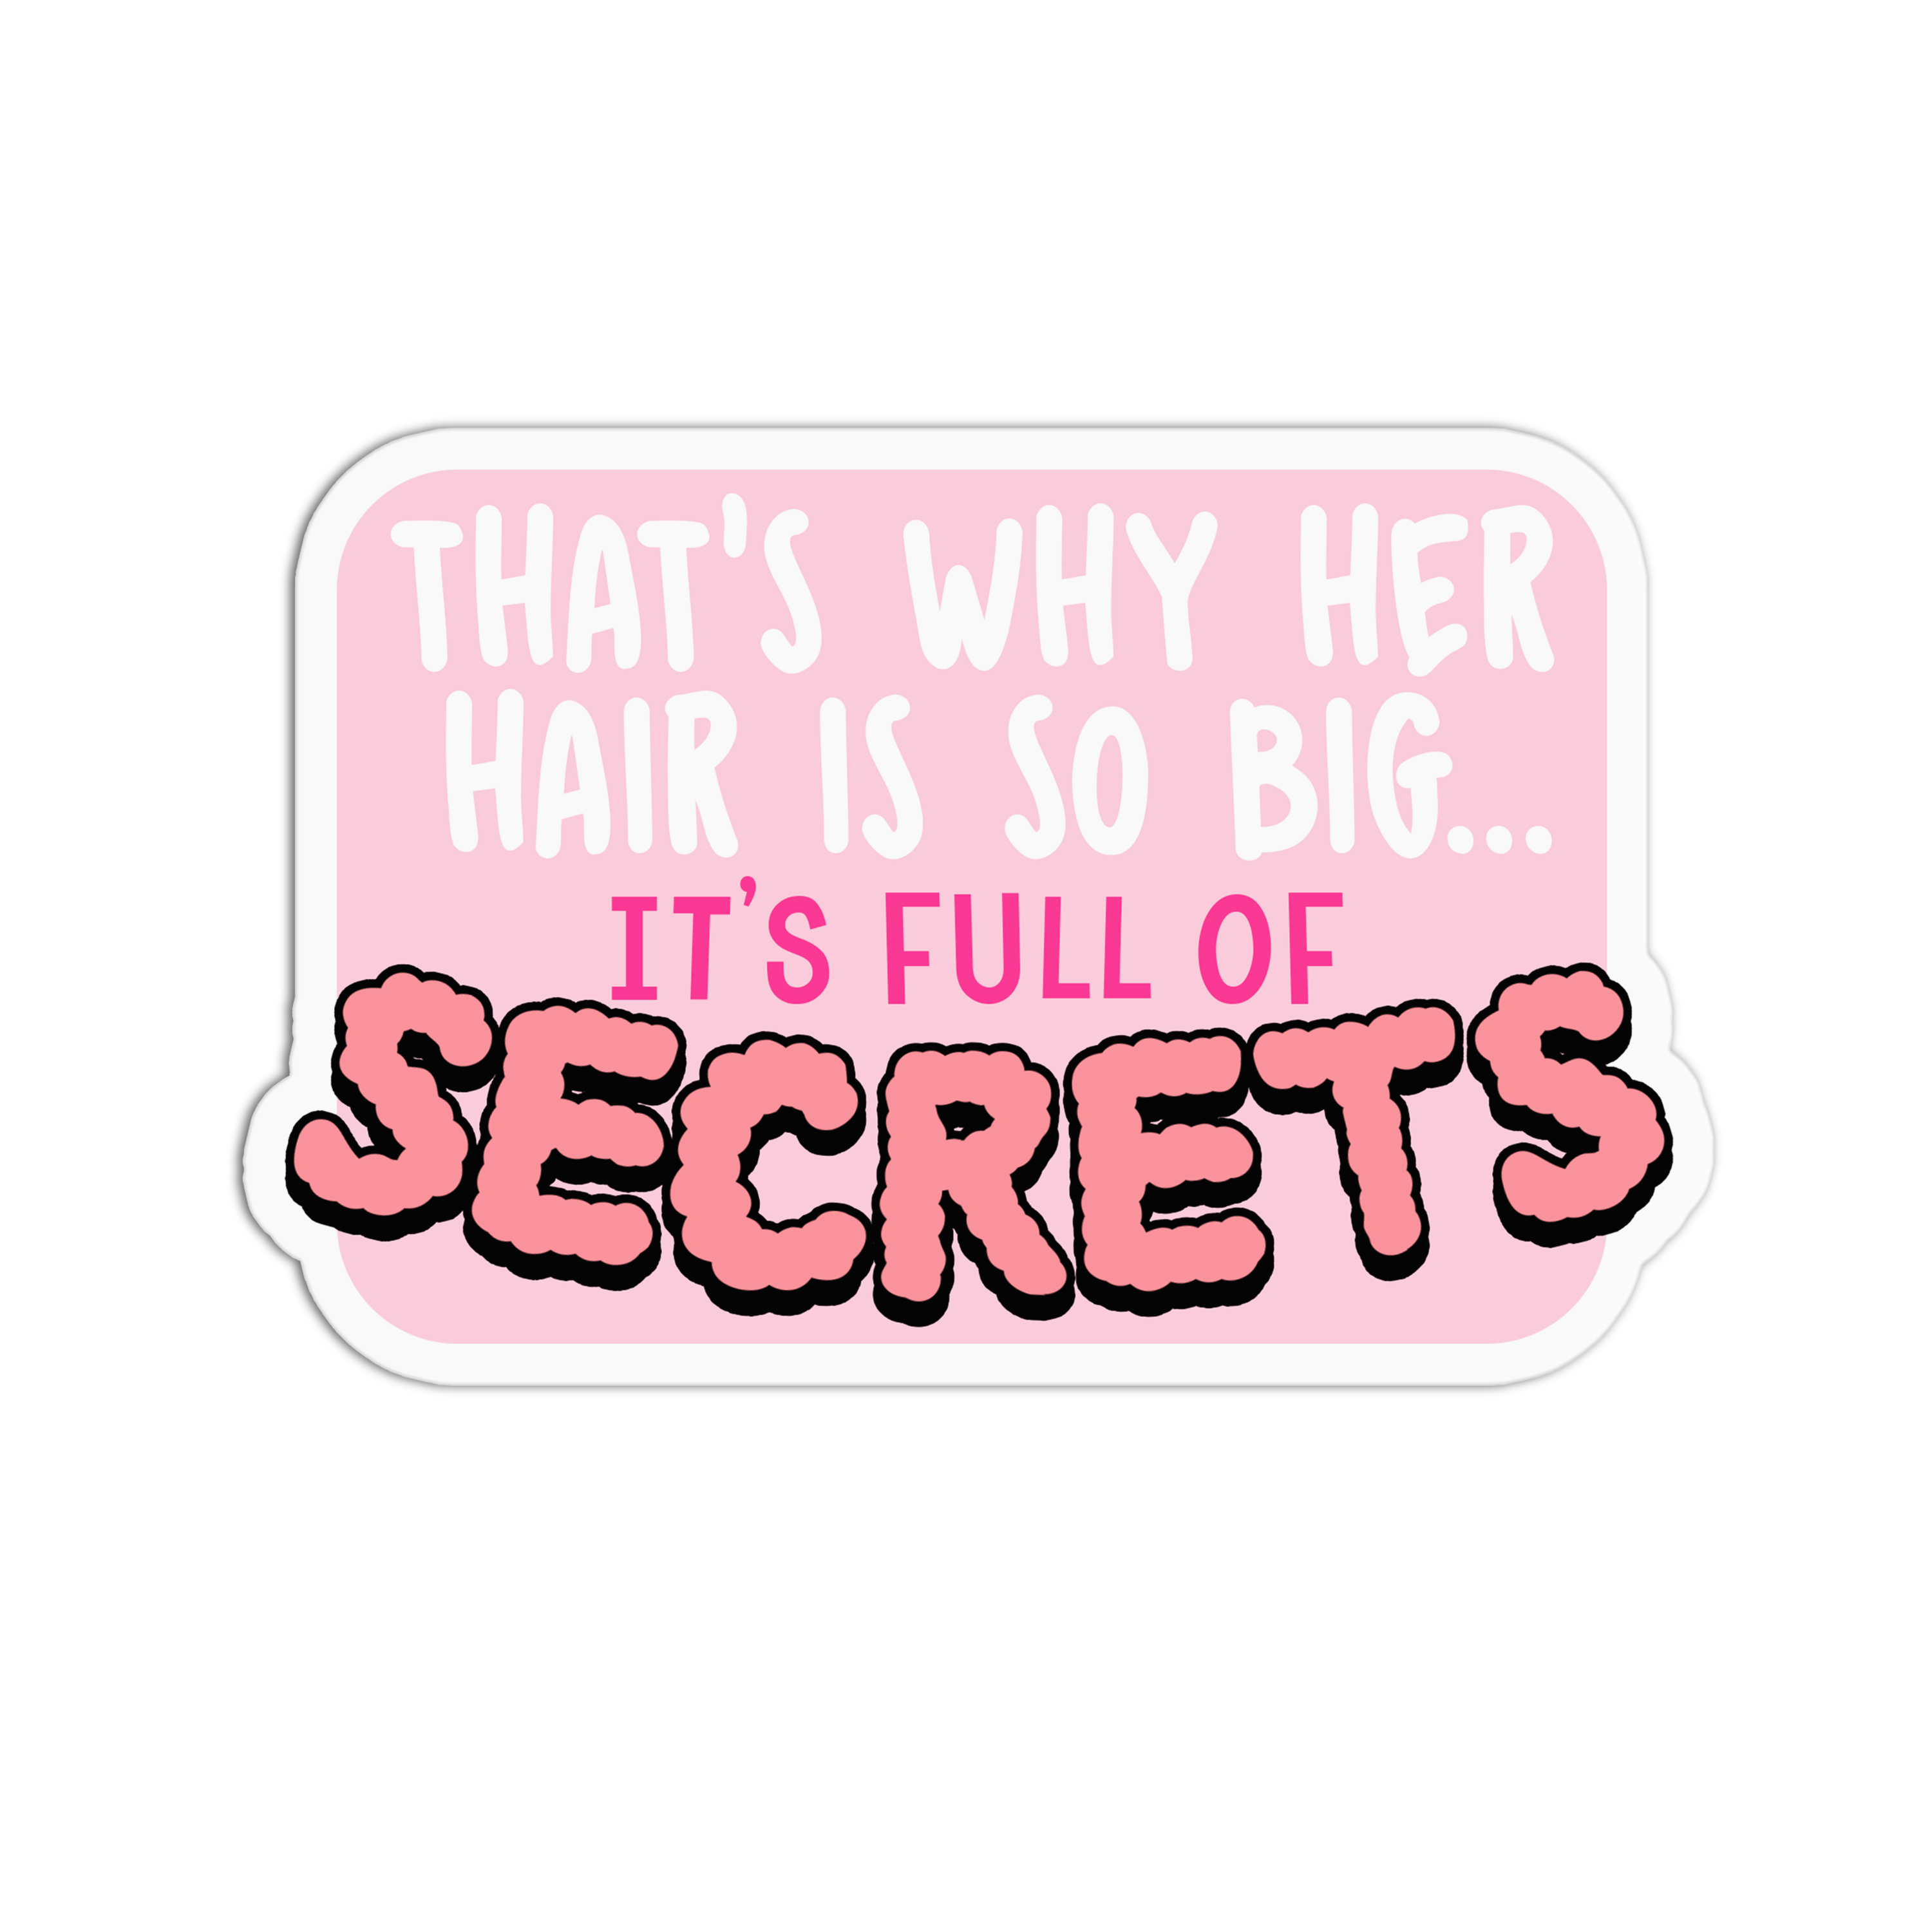 That's why her hair is so big it's full of secrets Mean Girls